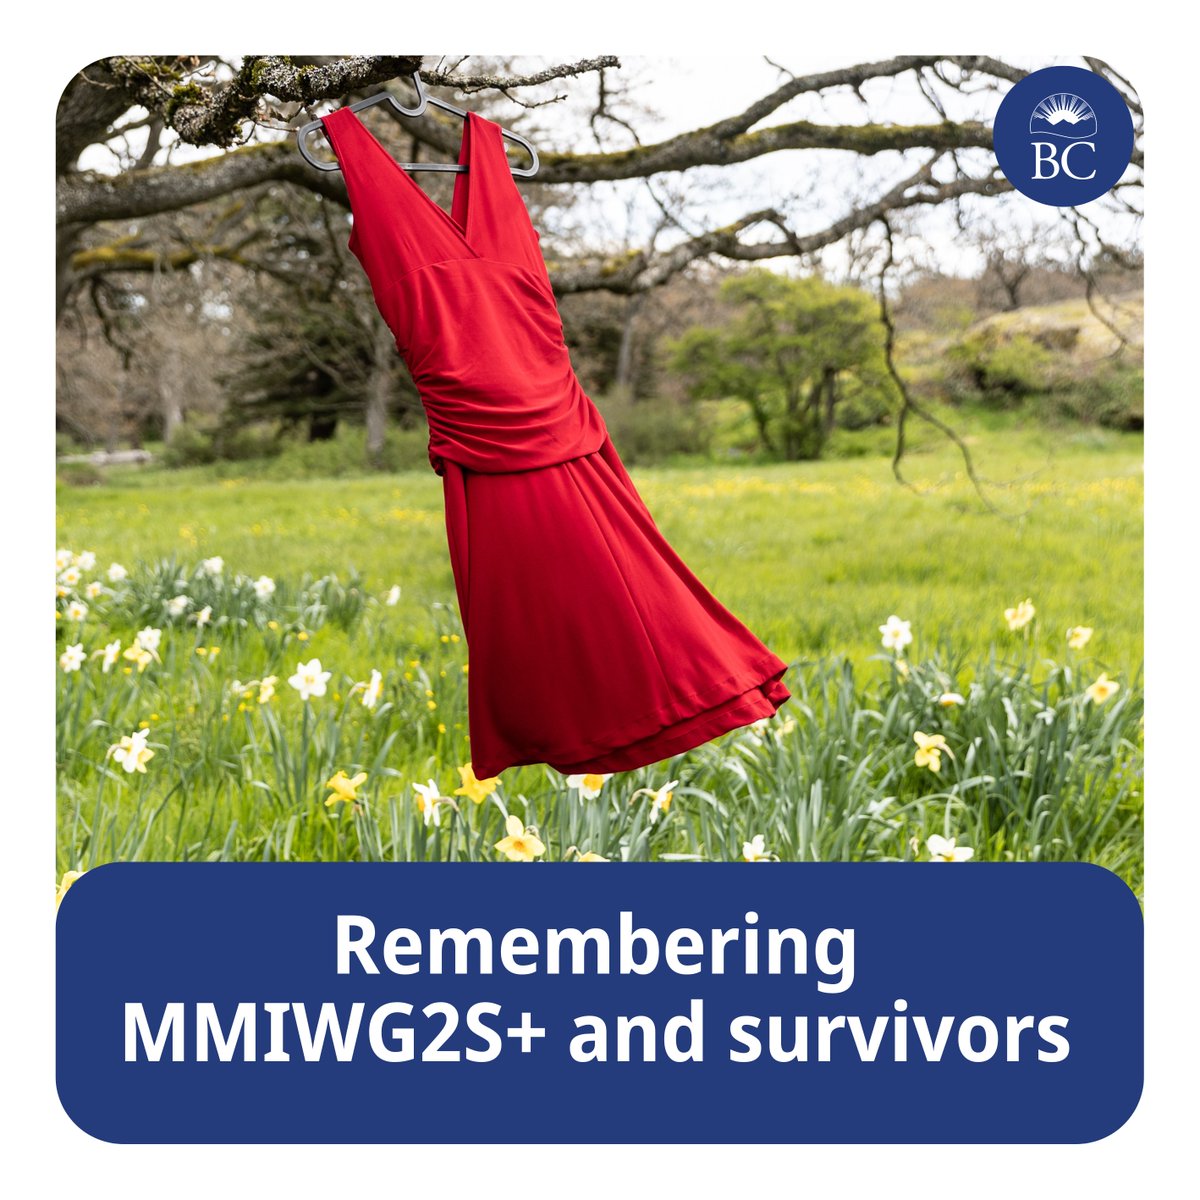 In 2011, an art installation of red dresses by Jamie Black sparked renewed awareness of #MMIWGS2S+ across Canada. Red Dress Day is a day to remember those lost and to support communities affected. Together, we can stop the violence. gov.bc.ca/End-Gender-Bas…